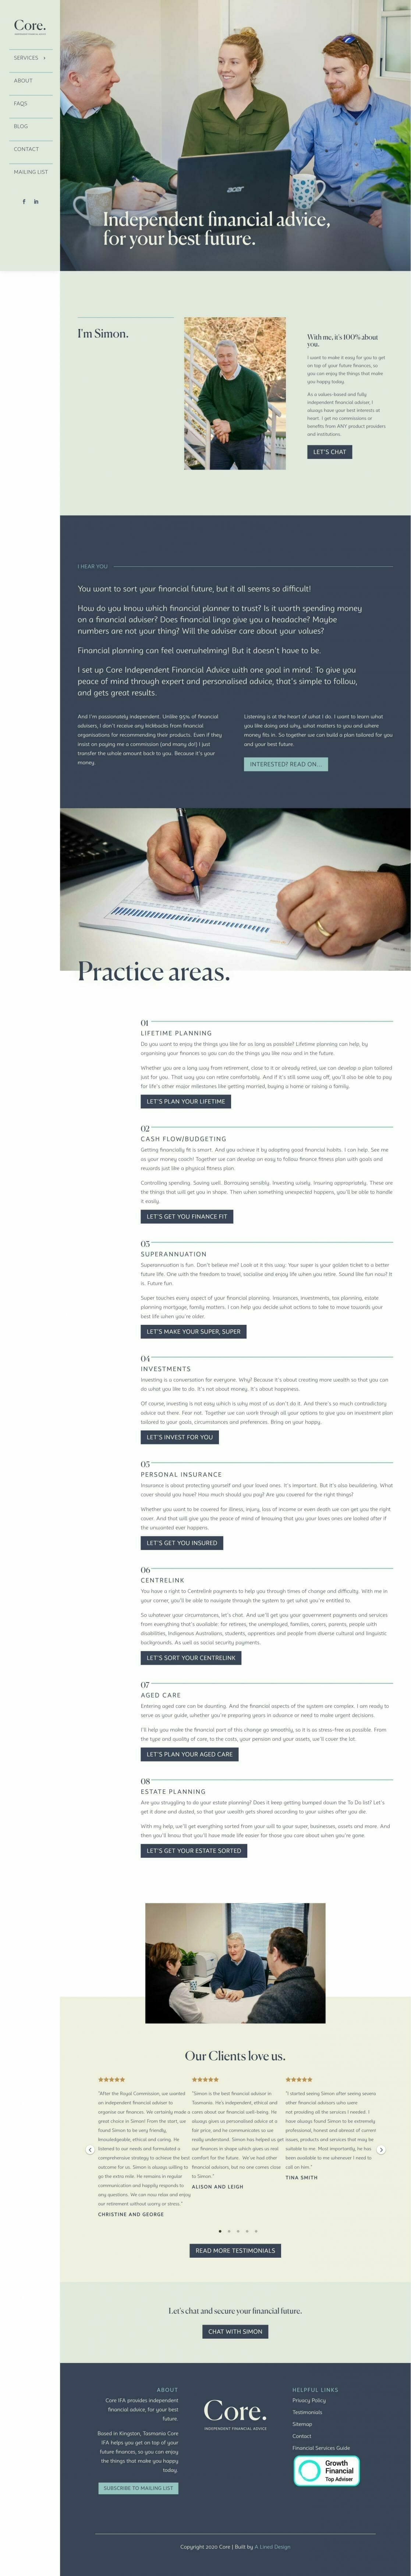 Core Independent Financial Advice Website design - after.